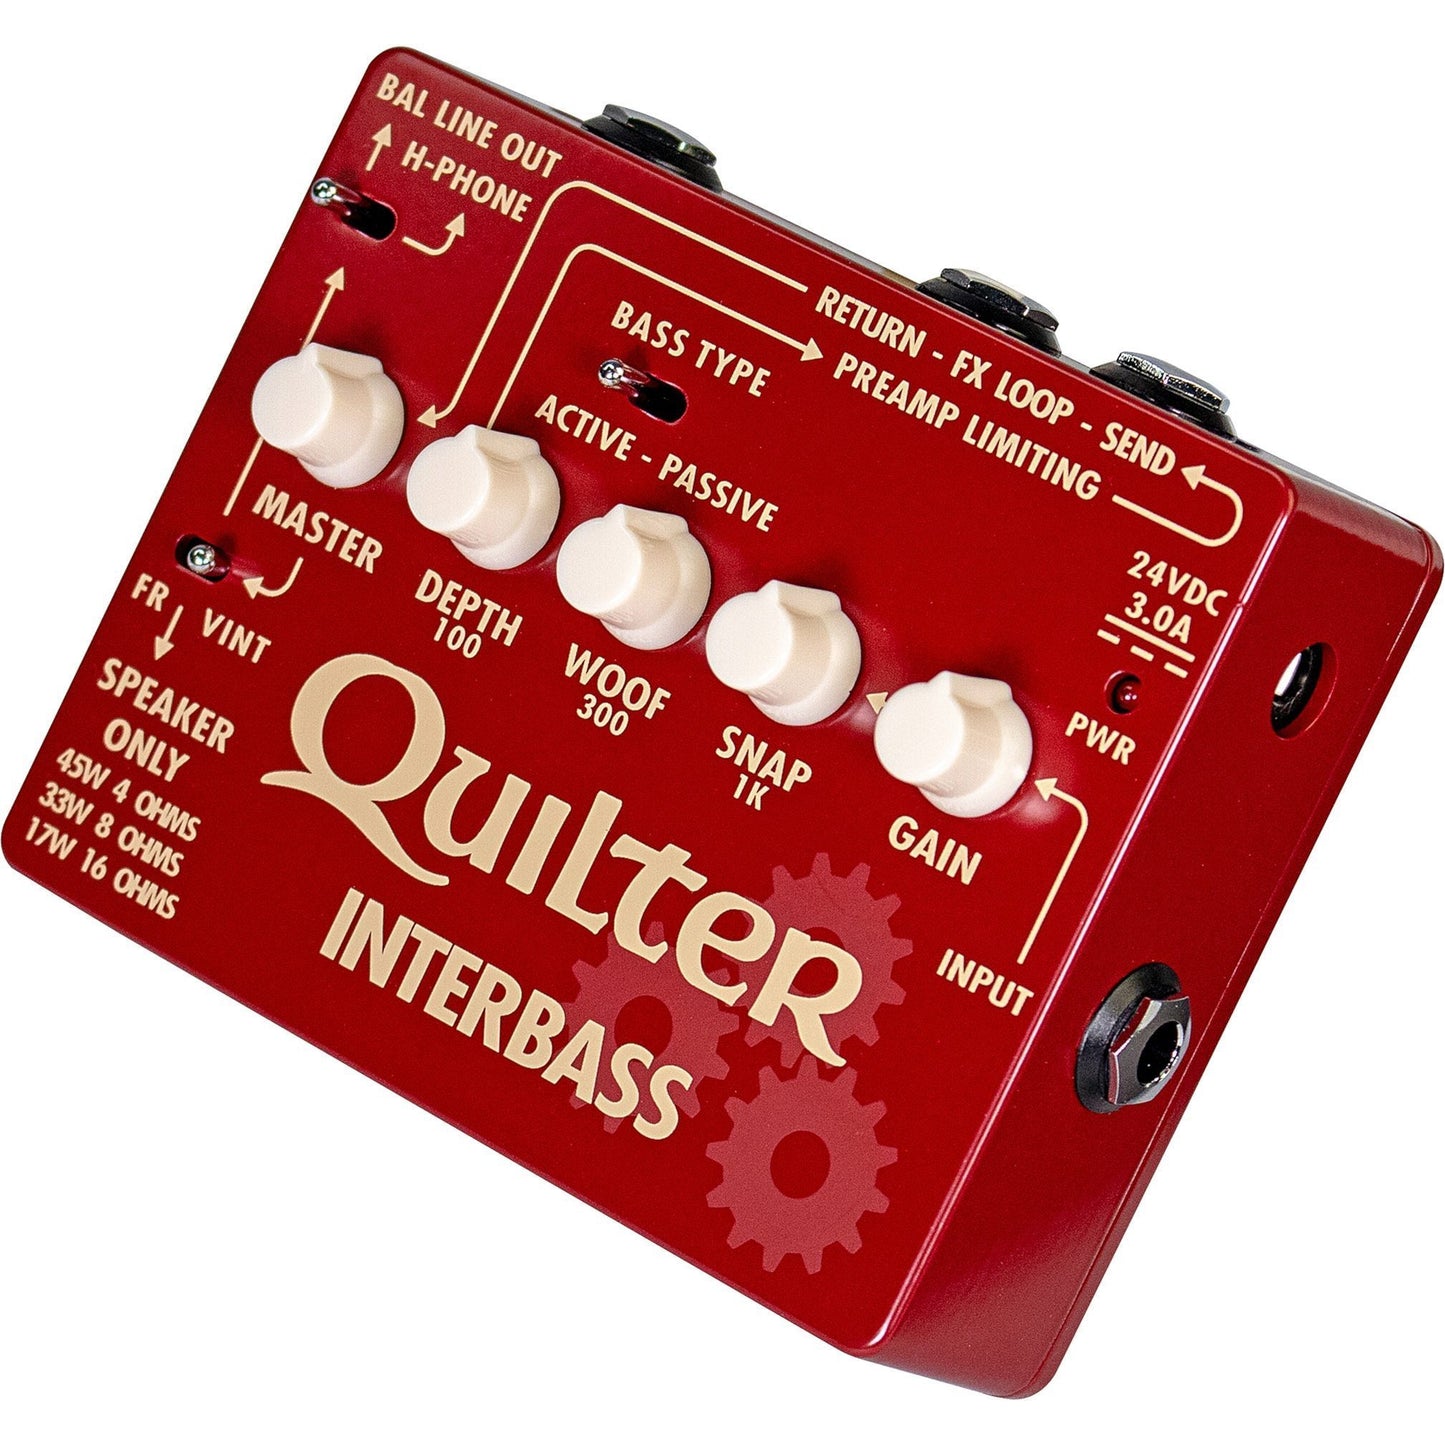 Quilter INTERBASS Power Amp and Direct Box (45 Watts)